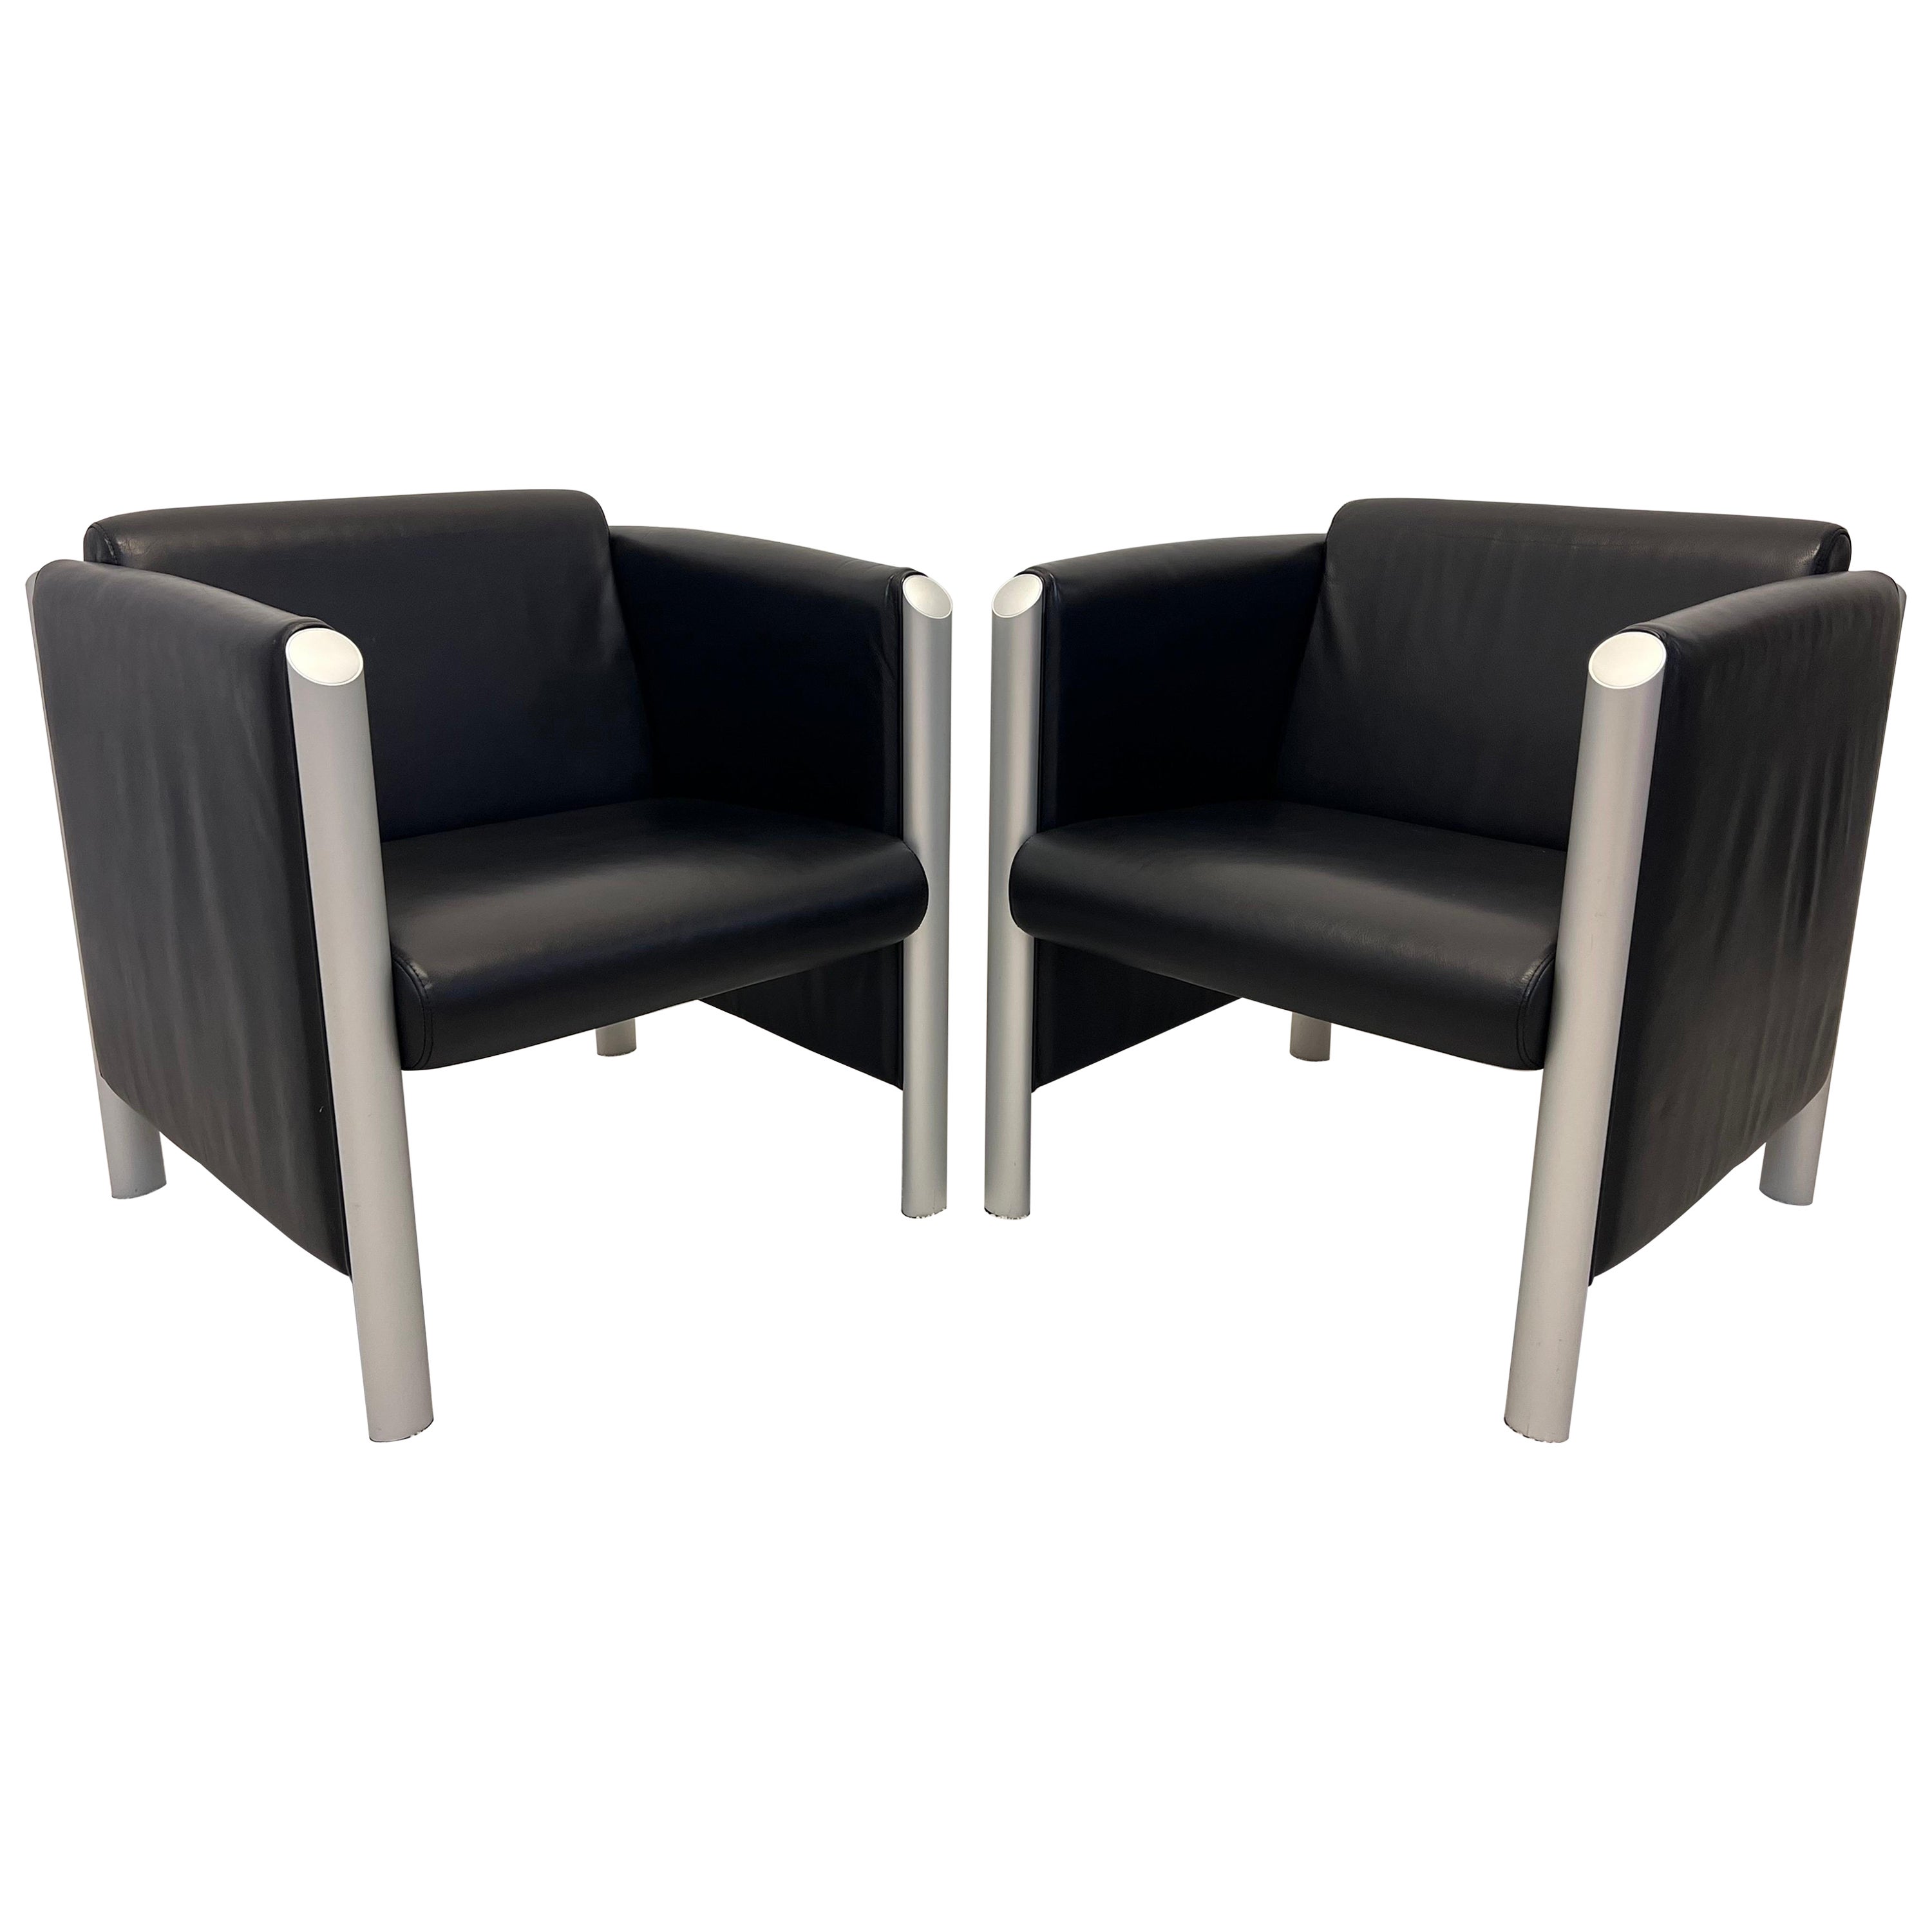 Klaus Franck and Werner Sauer 830 Cubis Chairs for Wilkhahn, a Pair